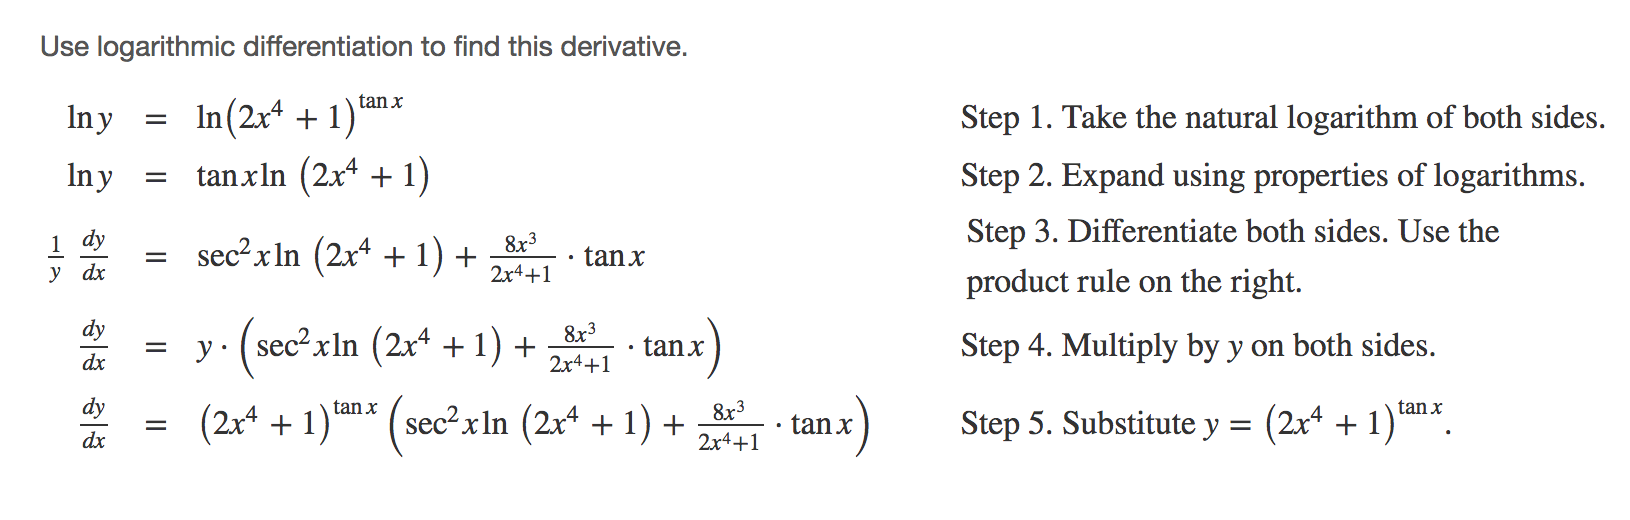 Using Logarithmic differentiation find the derivative of the  function. Step 1 Take the natural logarithm of both sides. Step 2 Expand using properties of  logarithms. Step 3 Differentiate both sites. Use the product rule on the right. Step 4 Multiply by Y on both sides. Step 5 Substitute y equals  2x^4 + 1, all raised to the exponent  tangent x.  